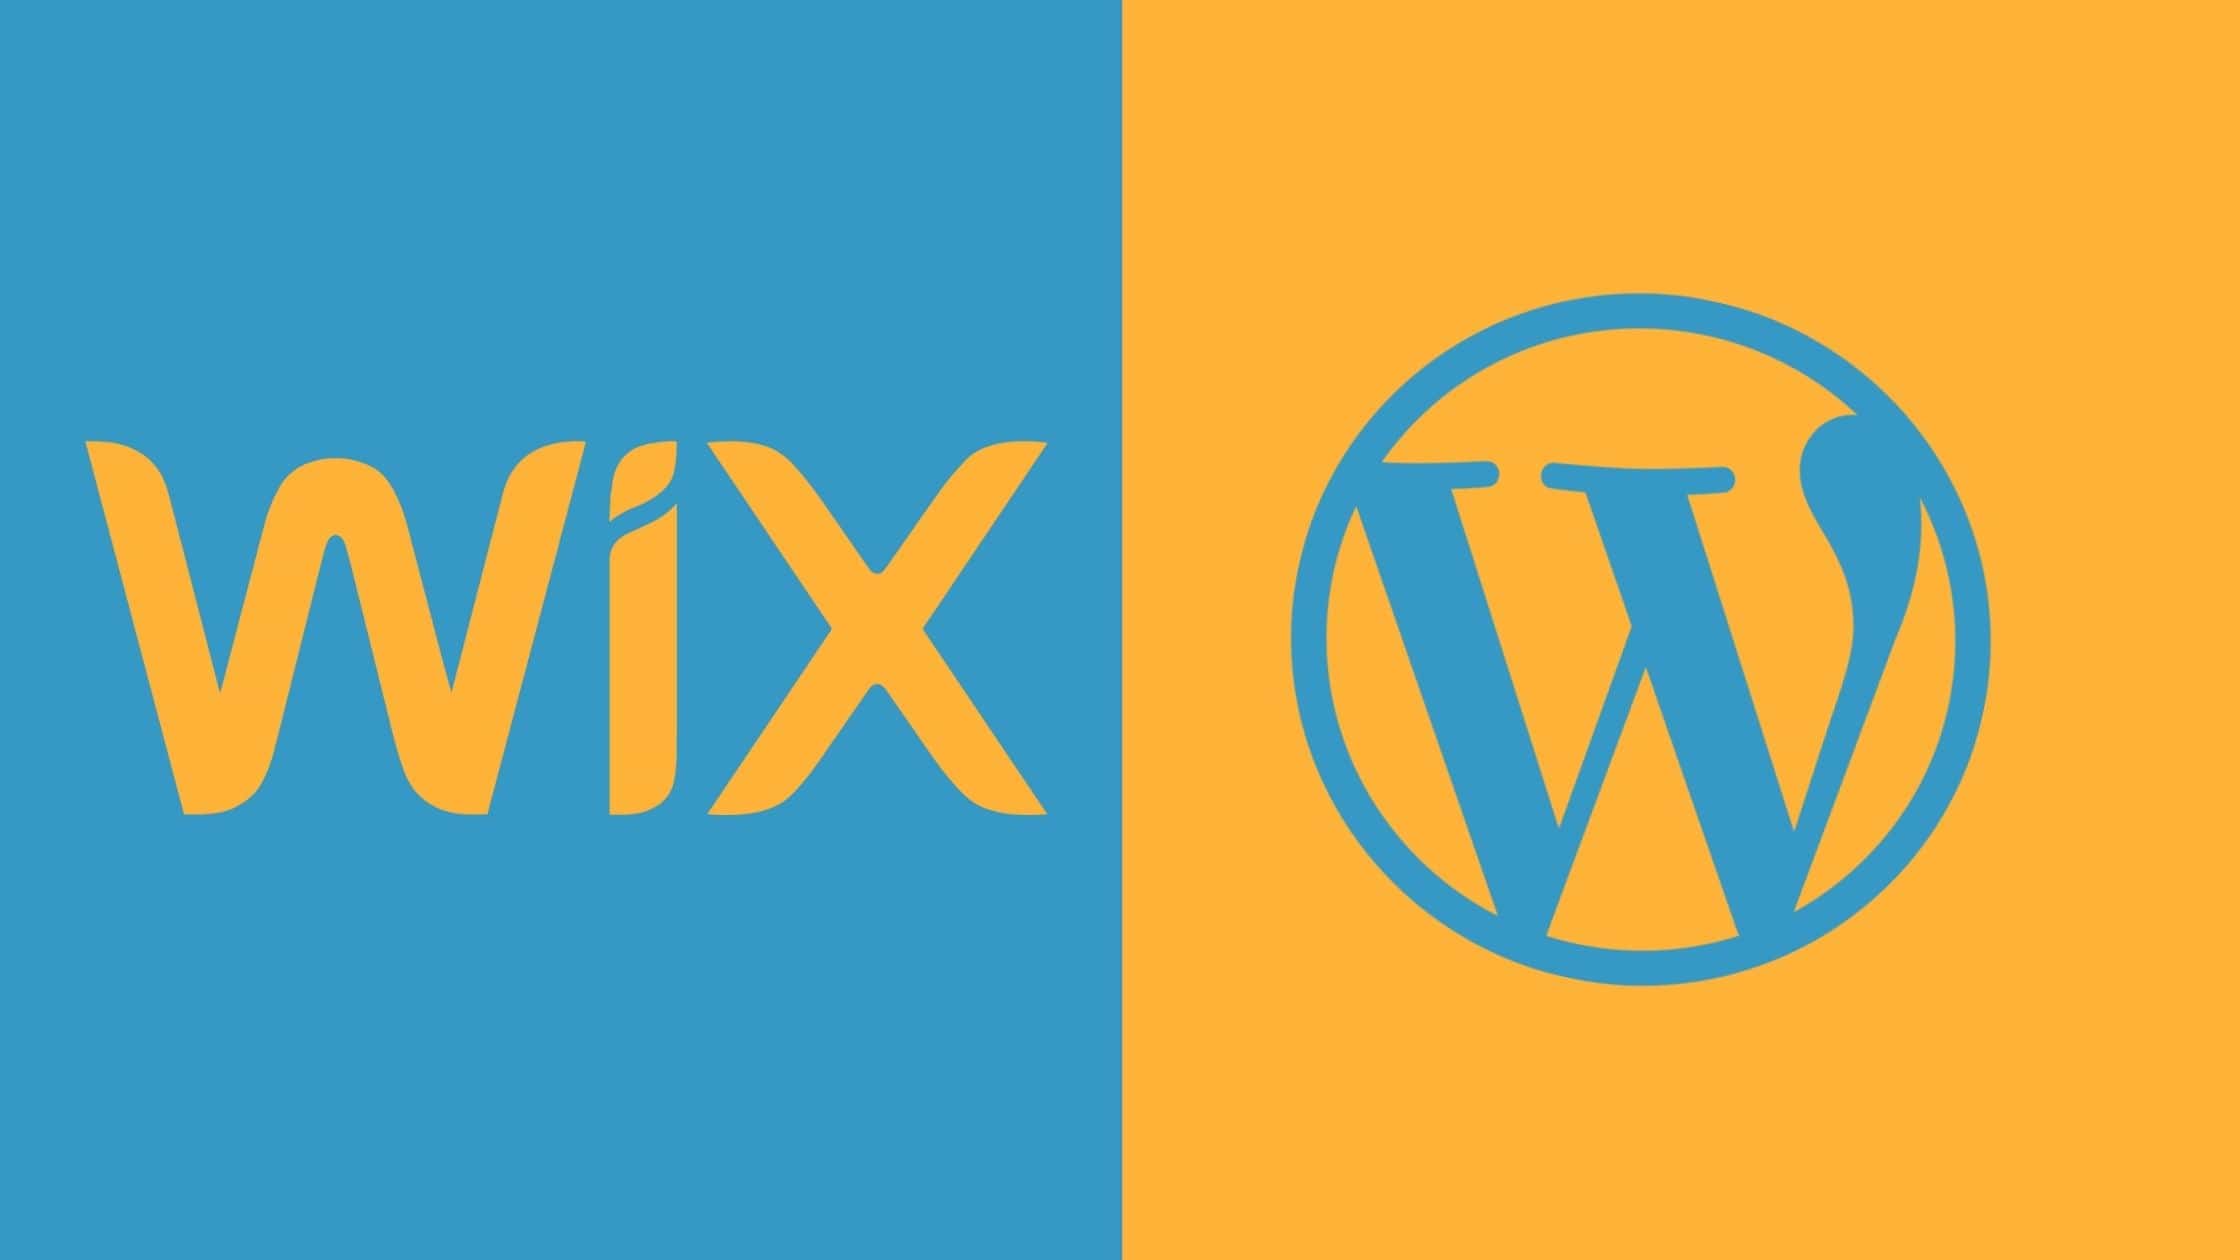 Wix Vs WordPress: Which Is The Better Platform To Build A Website?